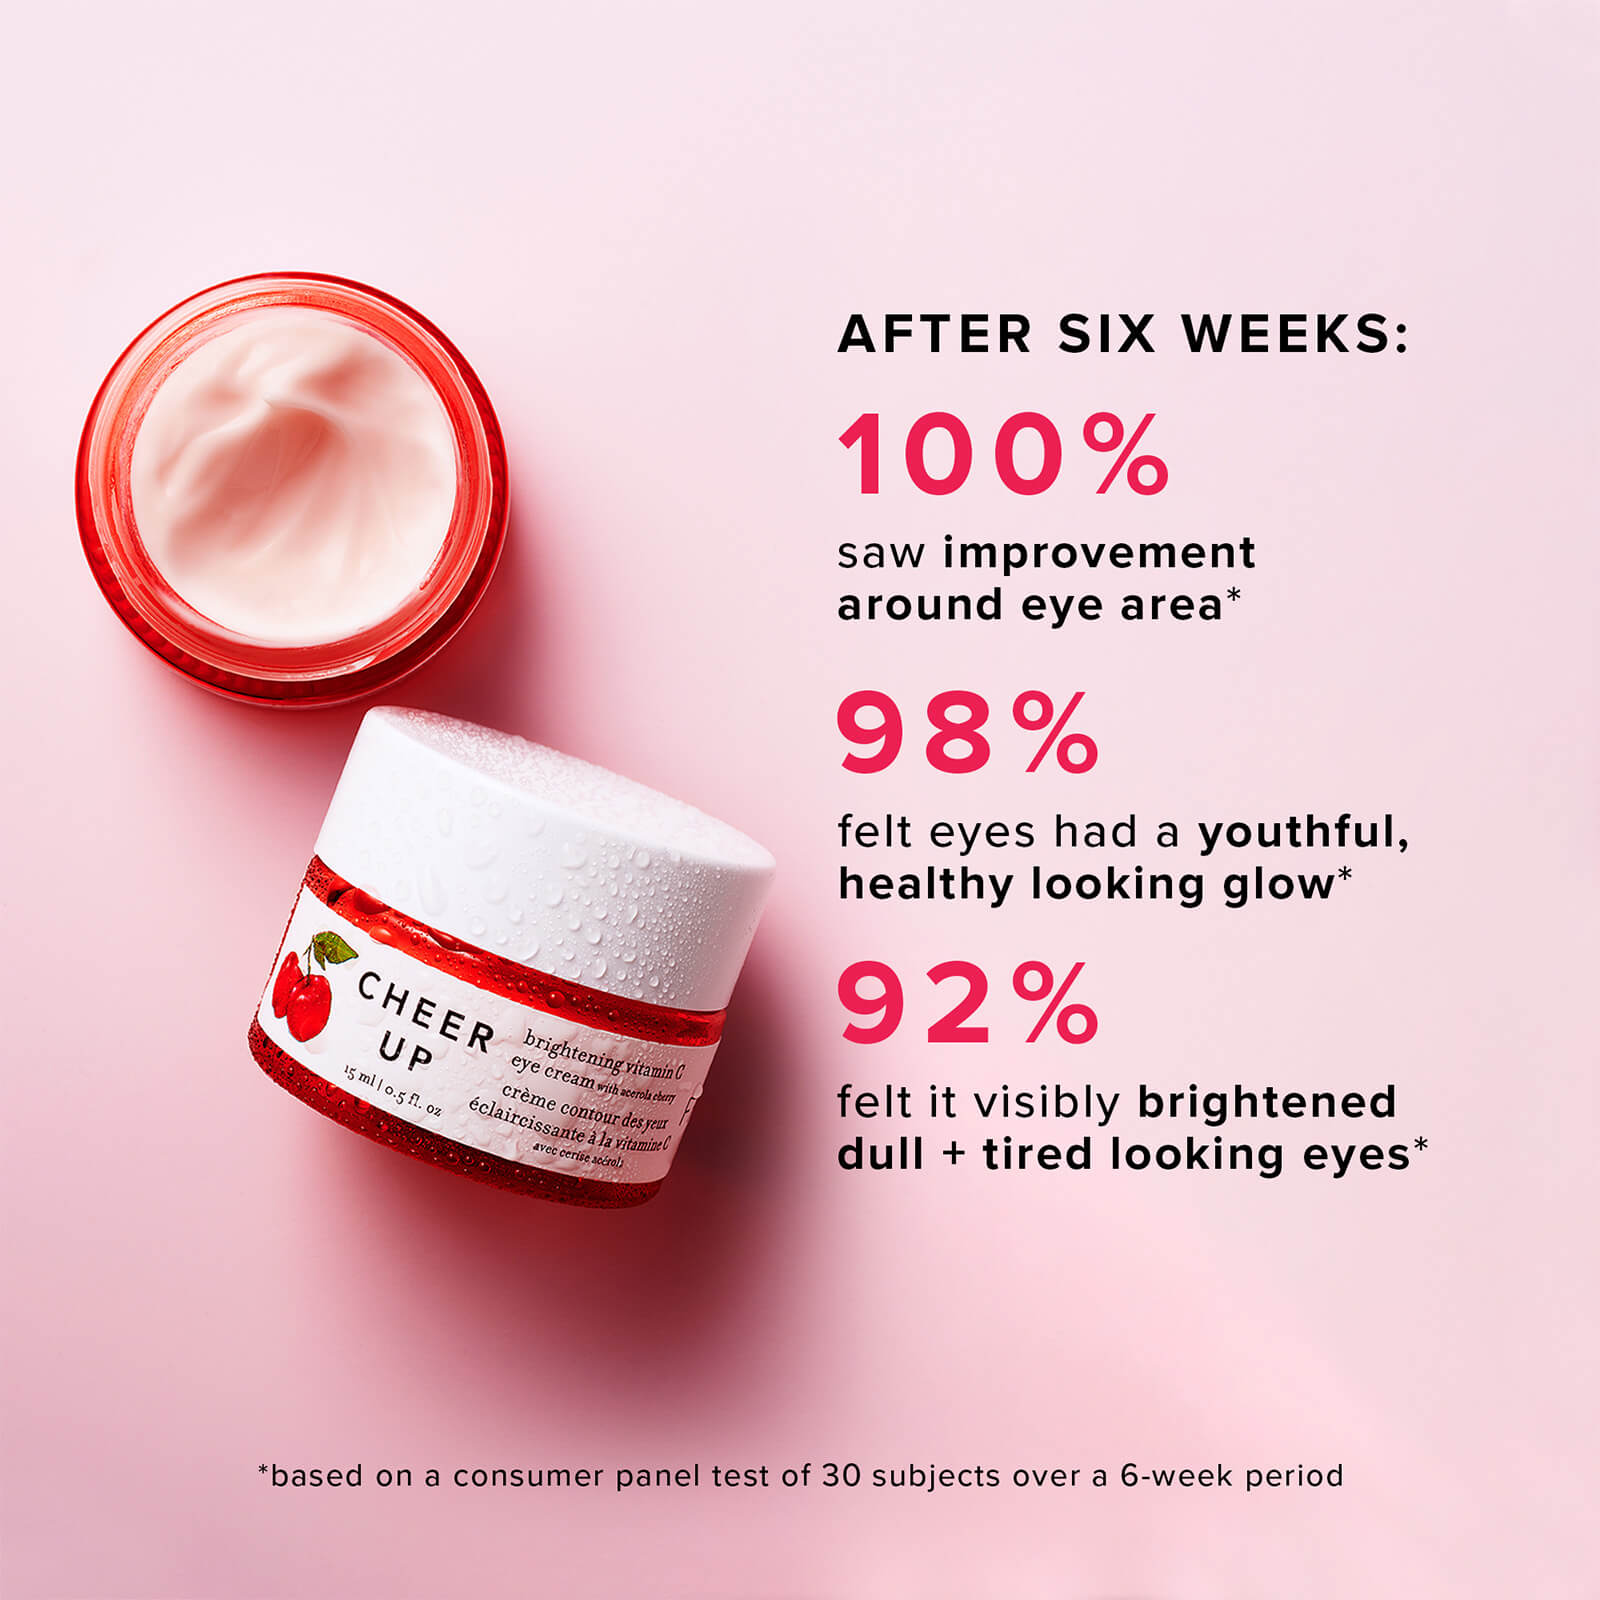 After 6 weeks 100% saw improvement around eye are*. 98% felt eyes had youthful, healthy looking glow*. 92% felt it visibly brightened dull and tired looking eyes*. *based on a consumer panel test of 30 subjects over a 6-week period